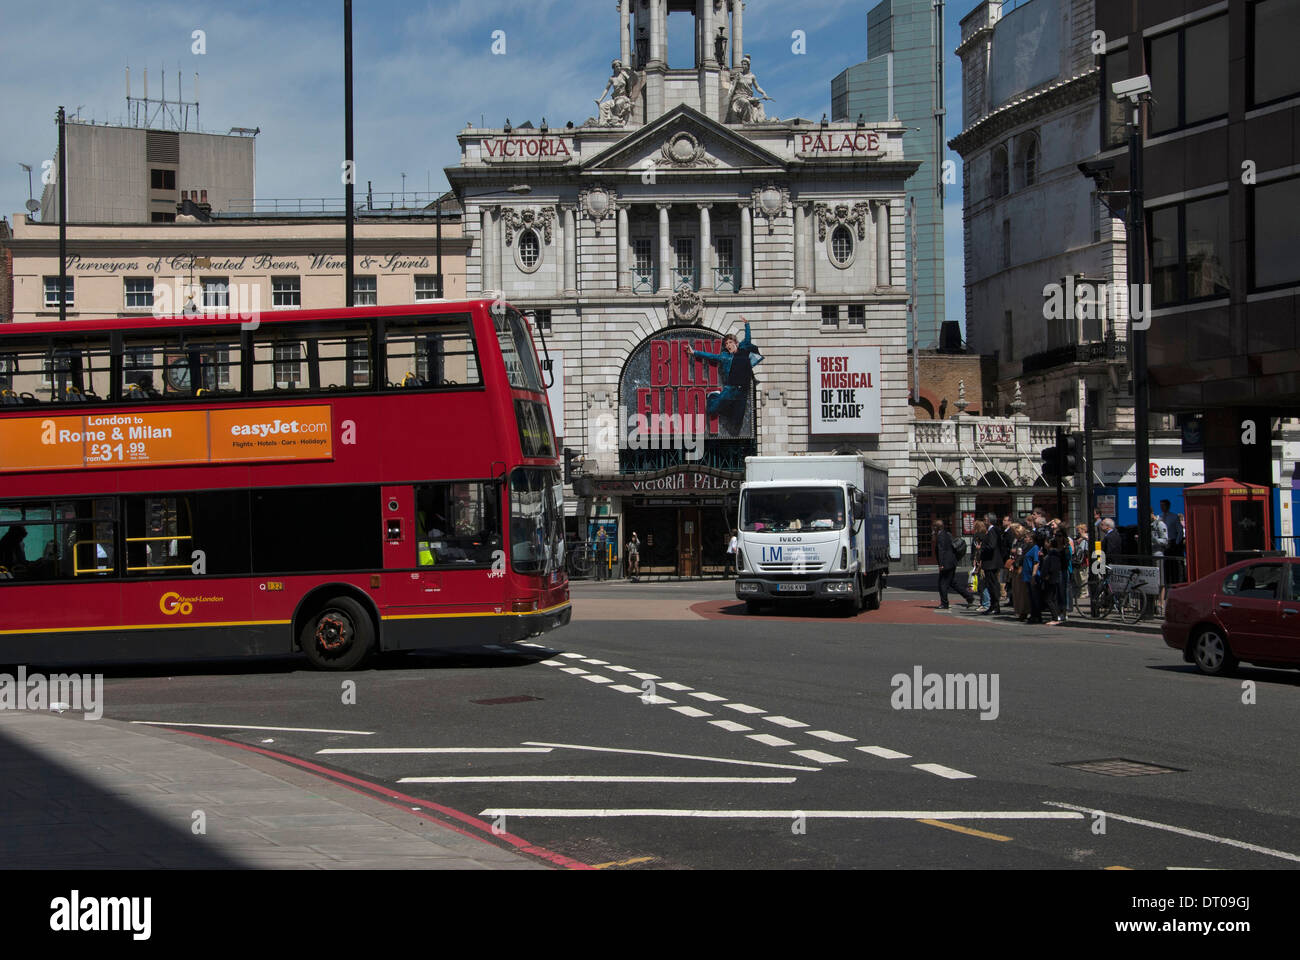 London red double decker bus passing in front of the Victoria Palace Theatre, Victoria Street. Stock Photo